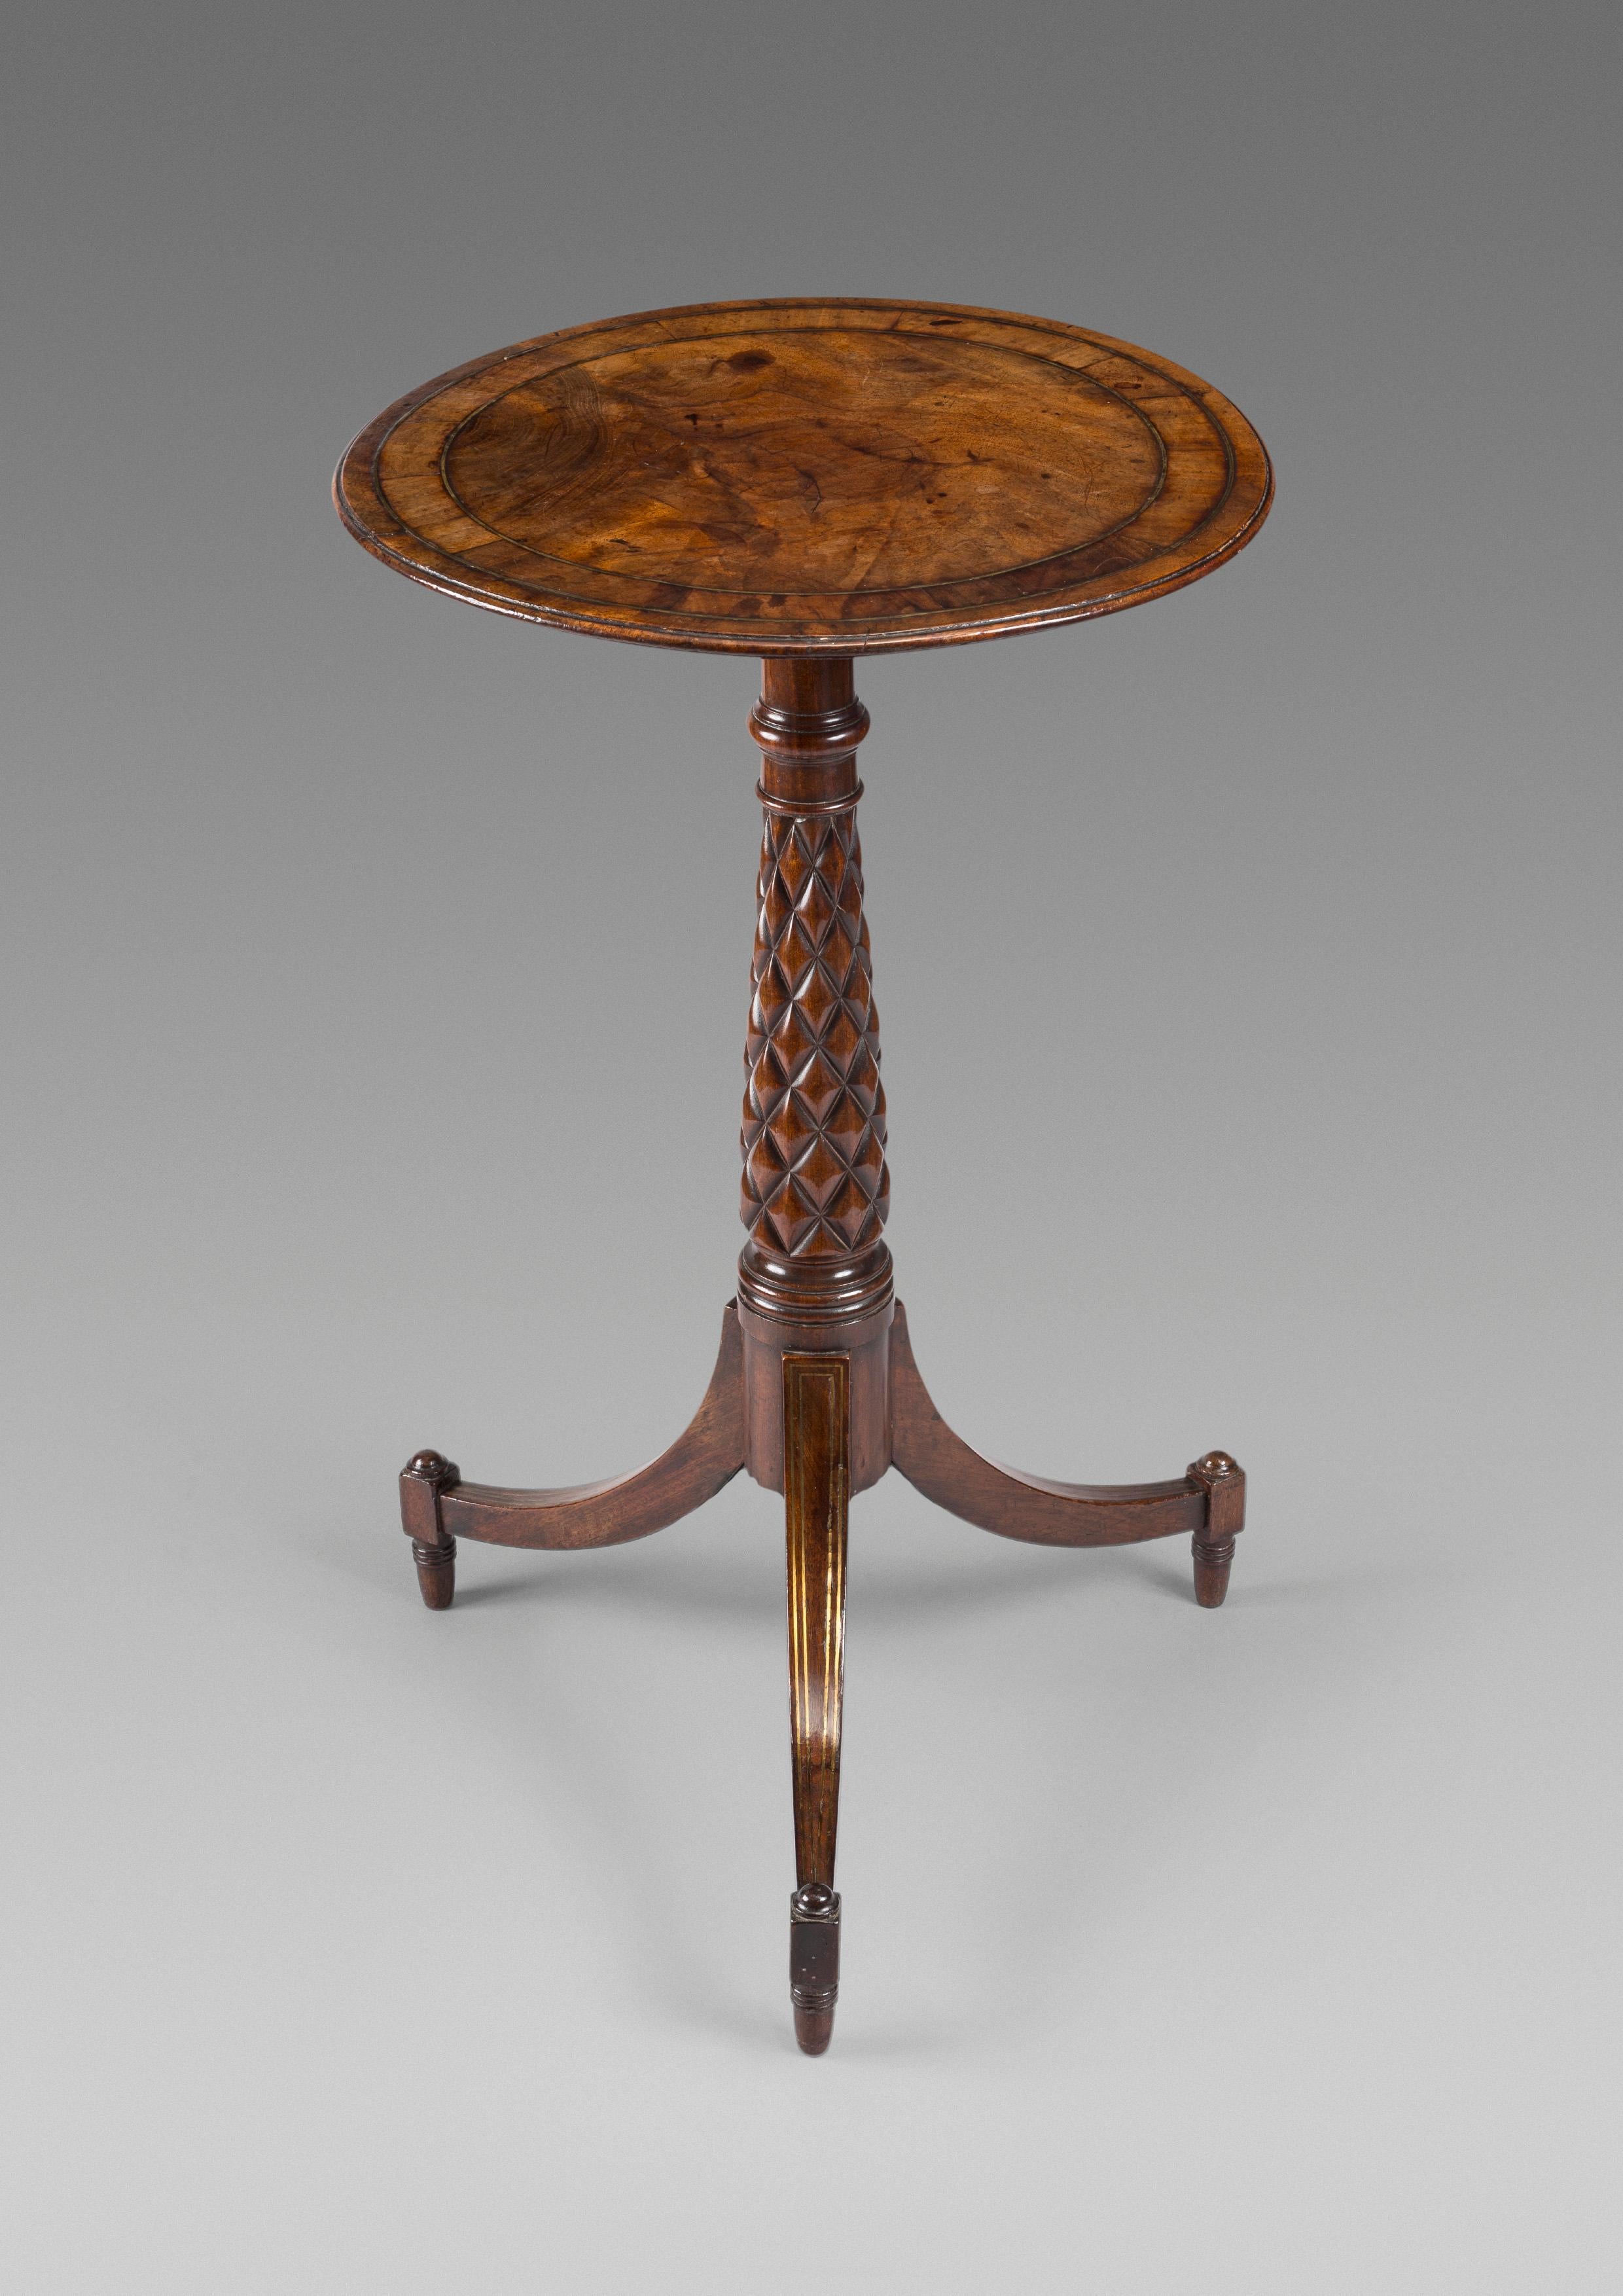 A very attractive early 19th century Regency period circular tripod table in beautifully figured mahogany. The circular top which is nicely patinated and with brass banding, is supported on a carved stem. The table is elegantly raised on three